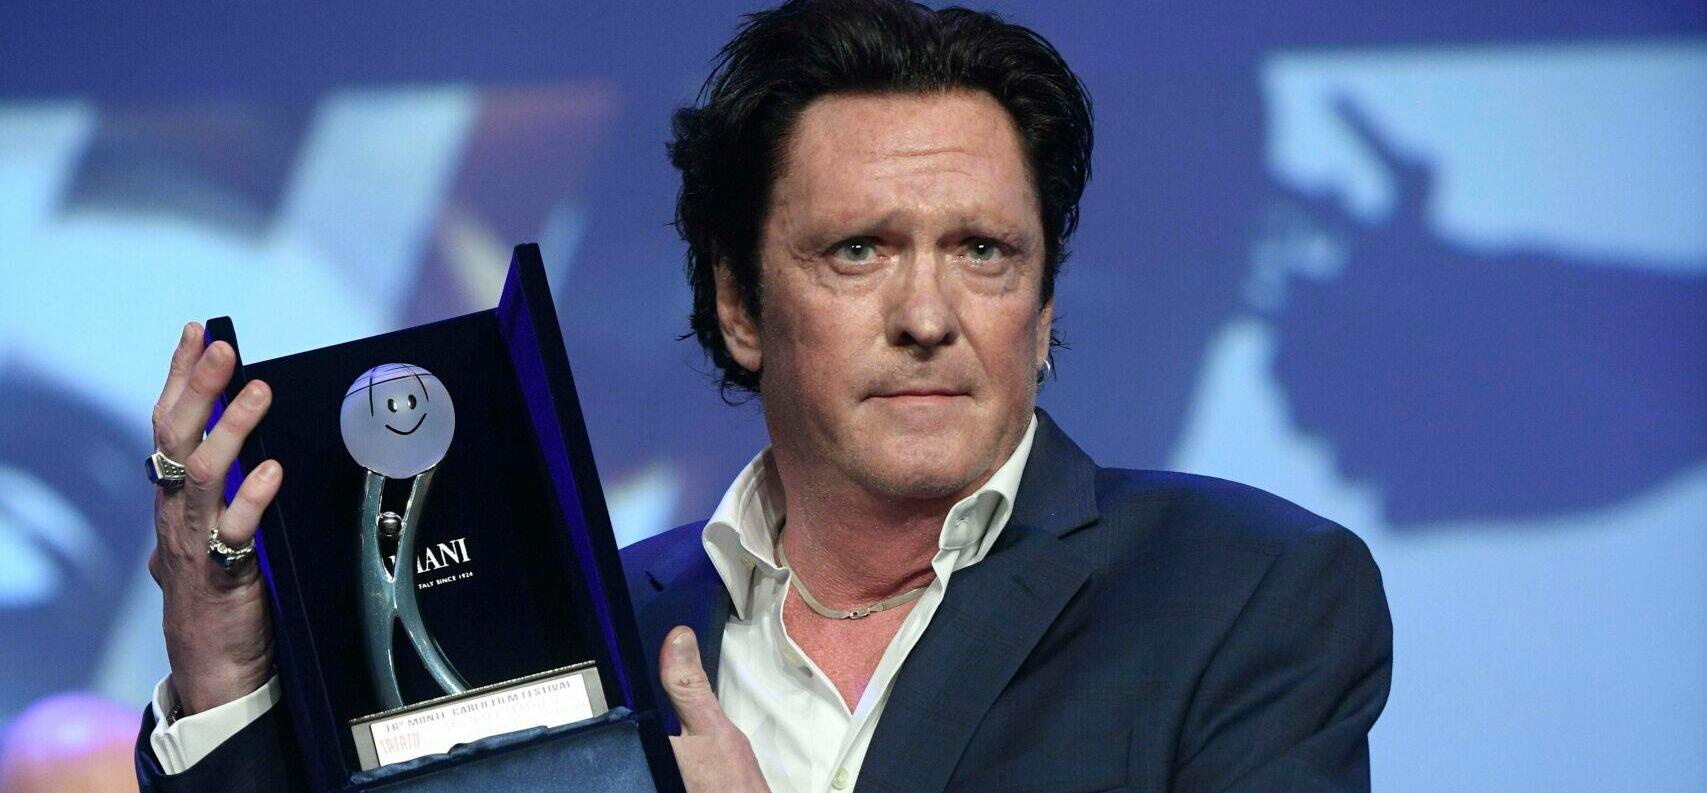 Michael Madsen Requesting A Full Military Investigation Into Son's Suicide